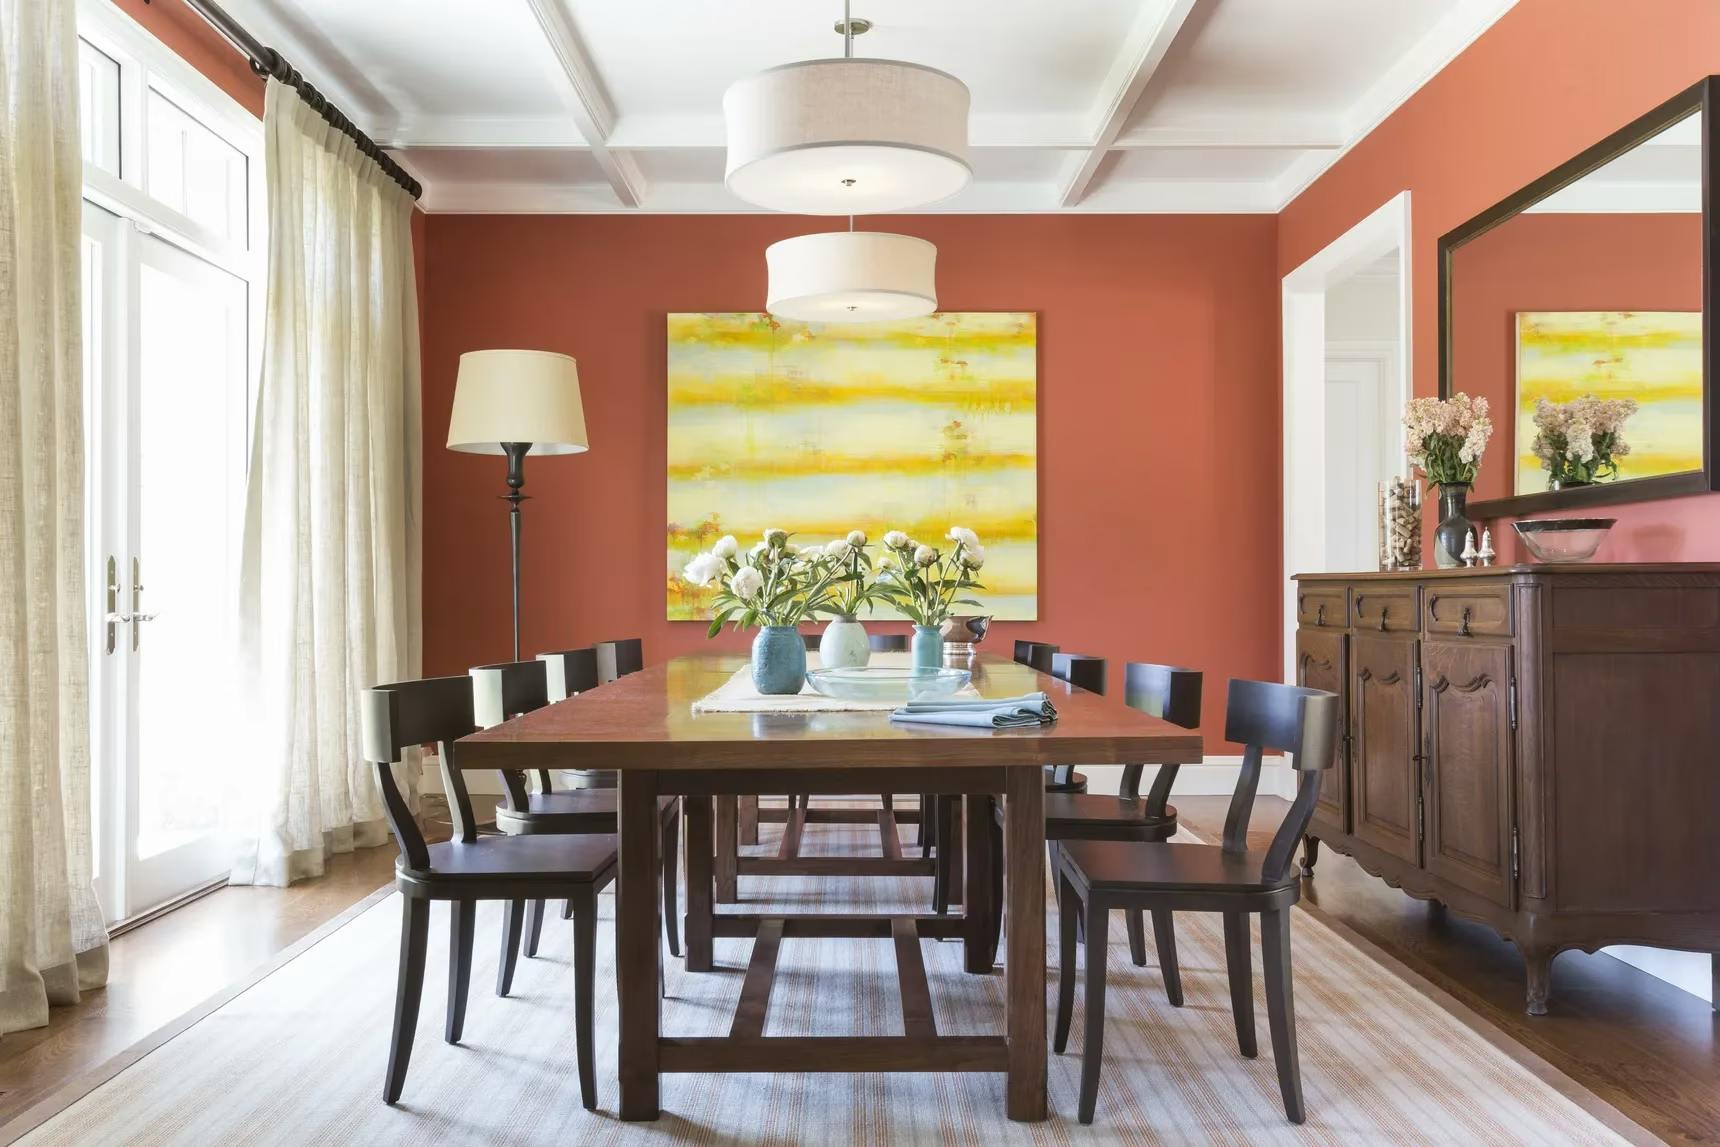 Crimson 1299 by Benjamin Moore, - featured in Curbed, photo by David Duncan Livingston